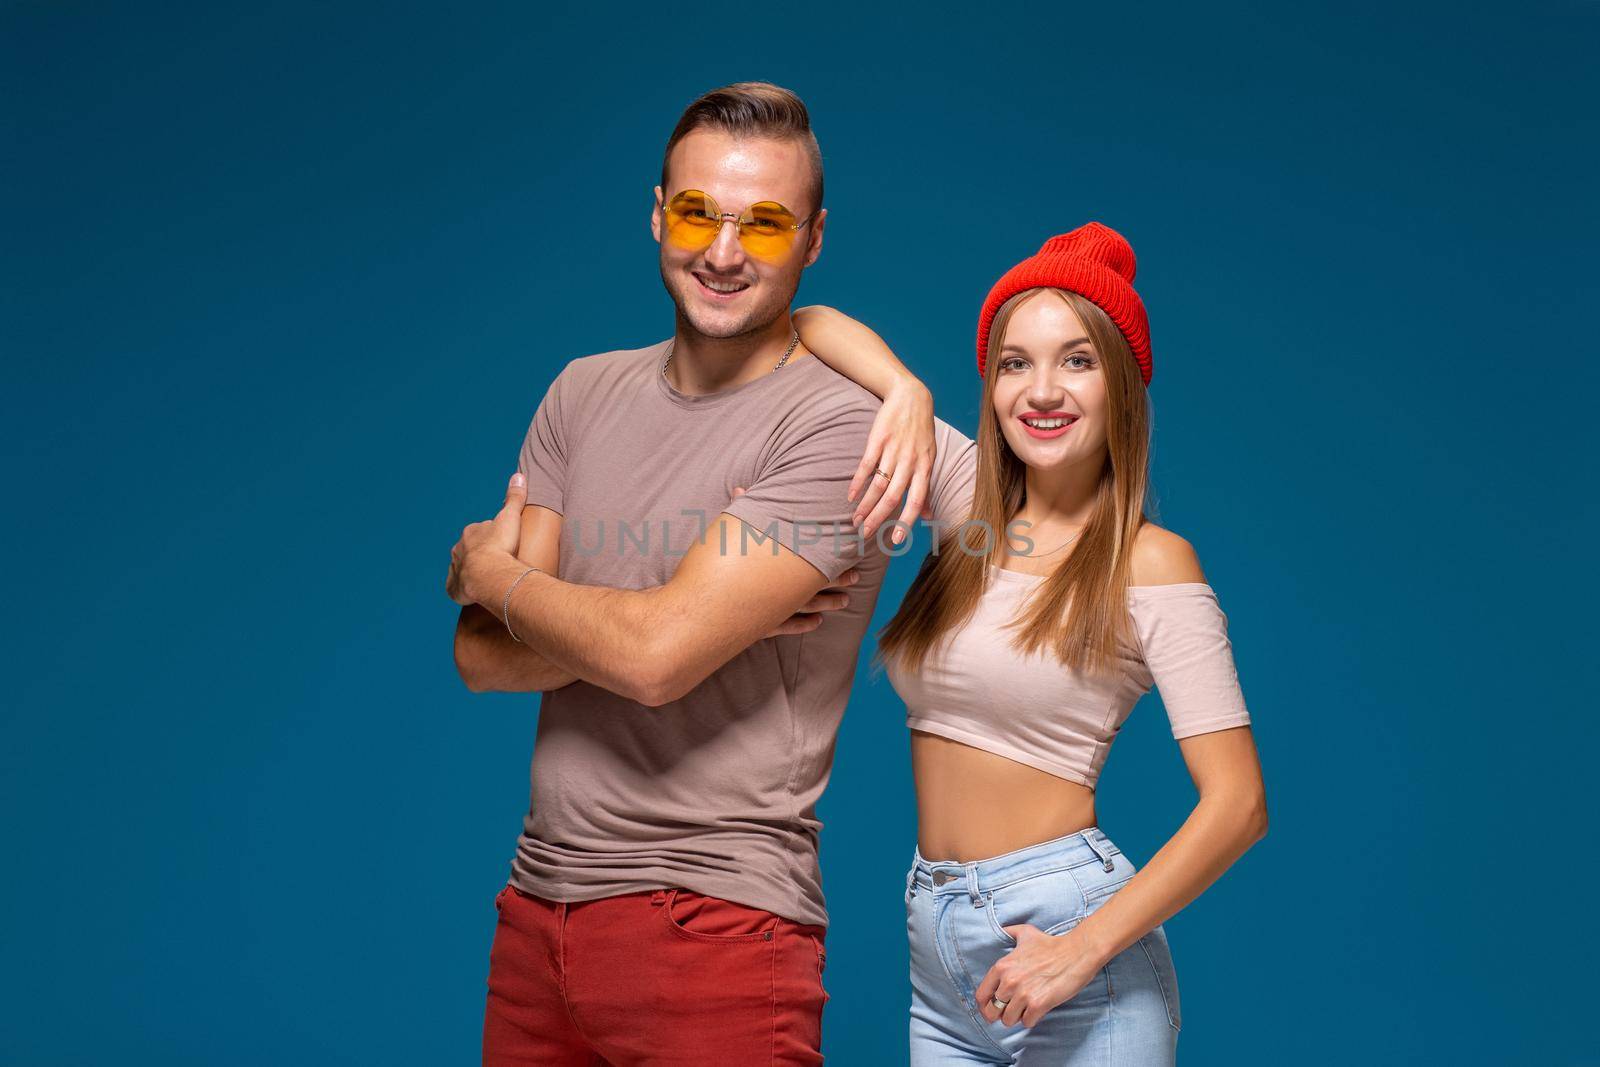 Studio lifestyle portrait of two best friends hipster wearing stylish bright outfits, hats, denim shorts and glasses, going crazy and having great time together. Indoor studio shot, isolated on blue background.